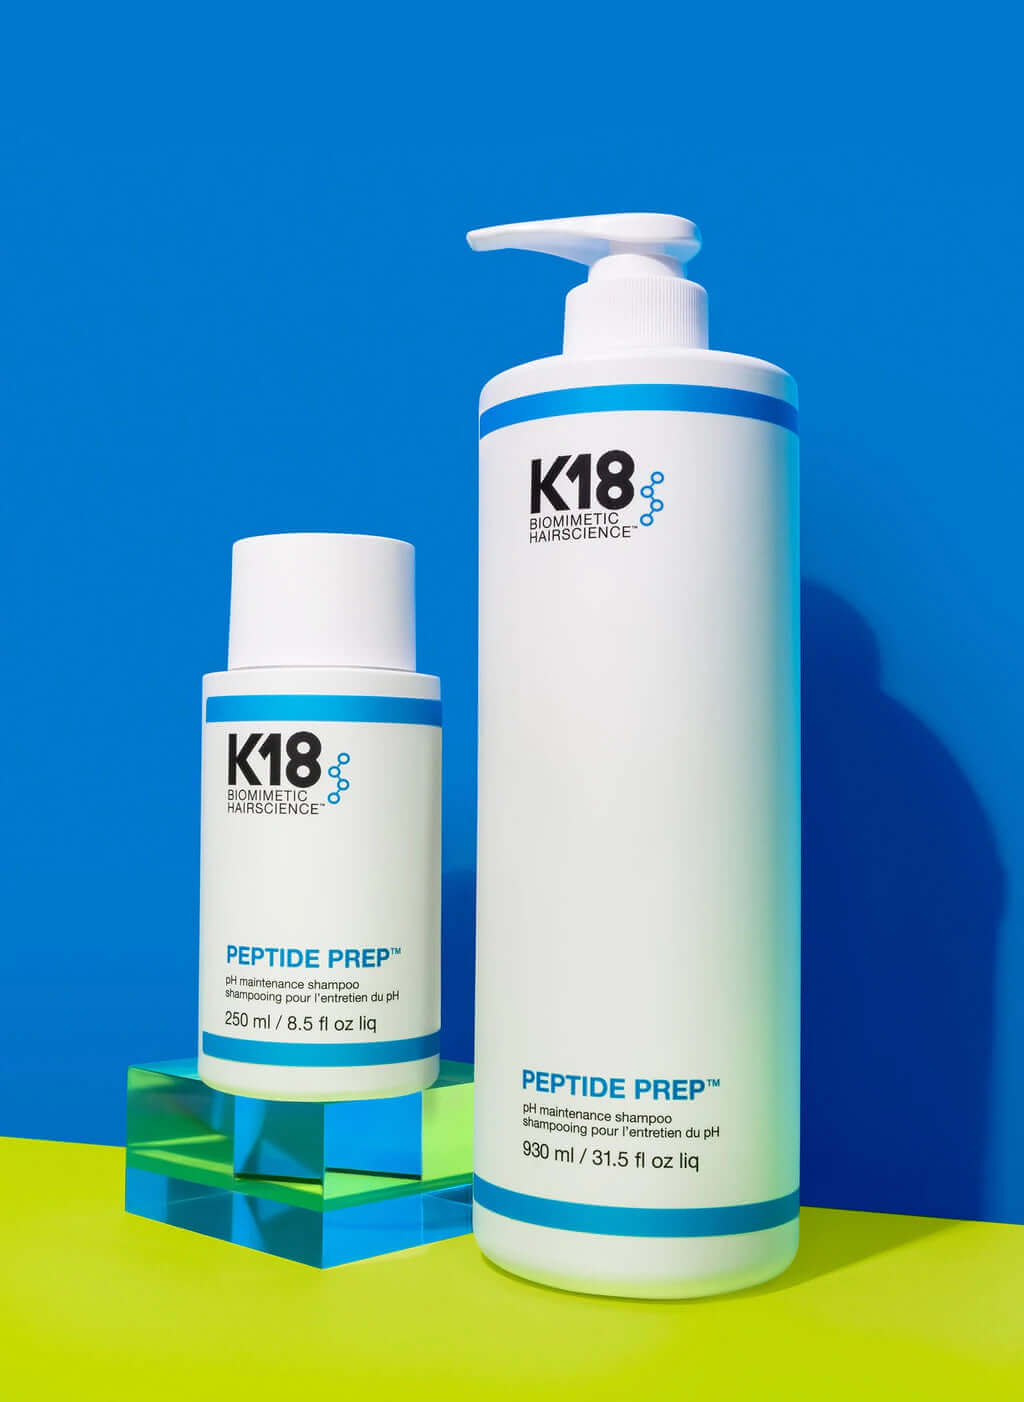 A bottle of pH-balanced K18 PEPTIDE PREP pH Maintenance Shampoo by K18 Hair Repair on a blue and yellow background.